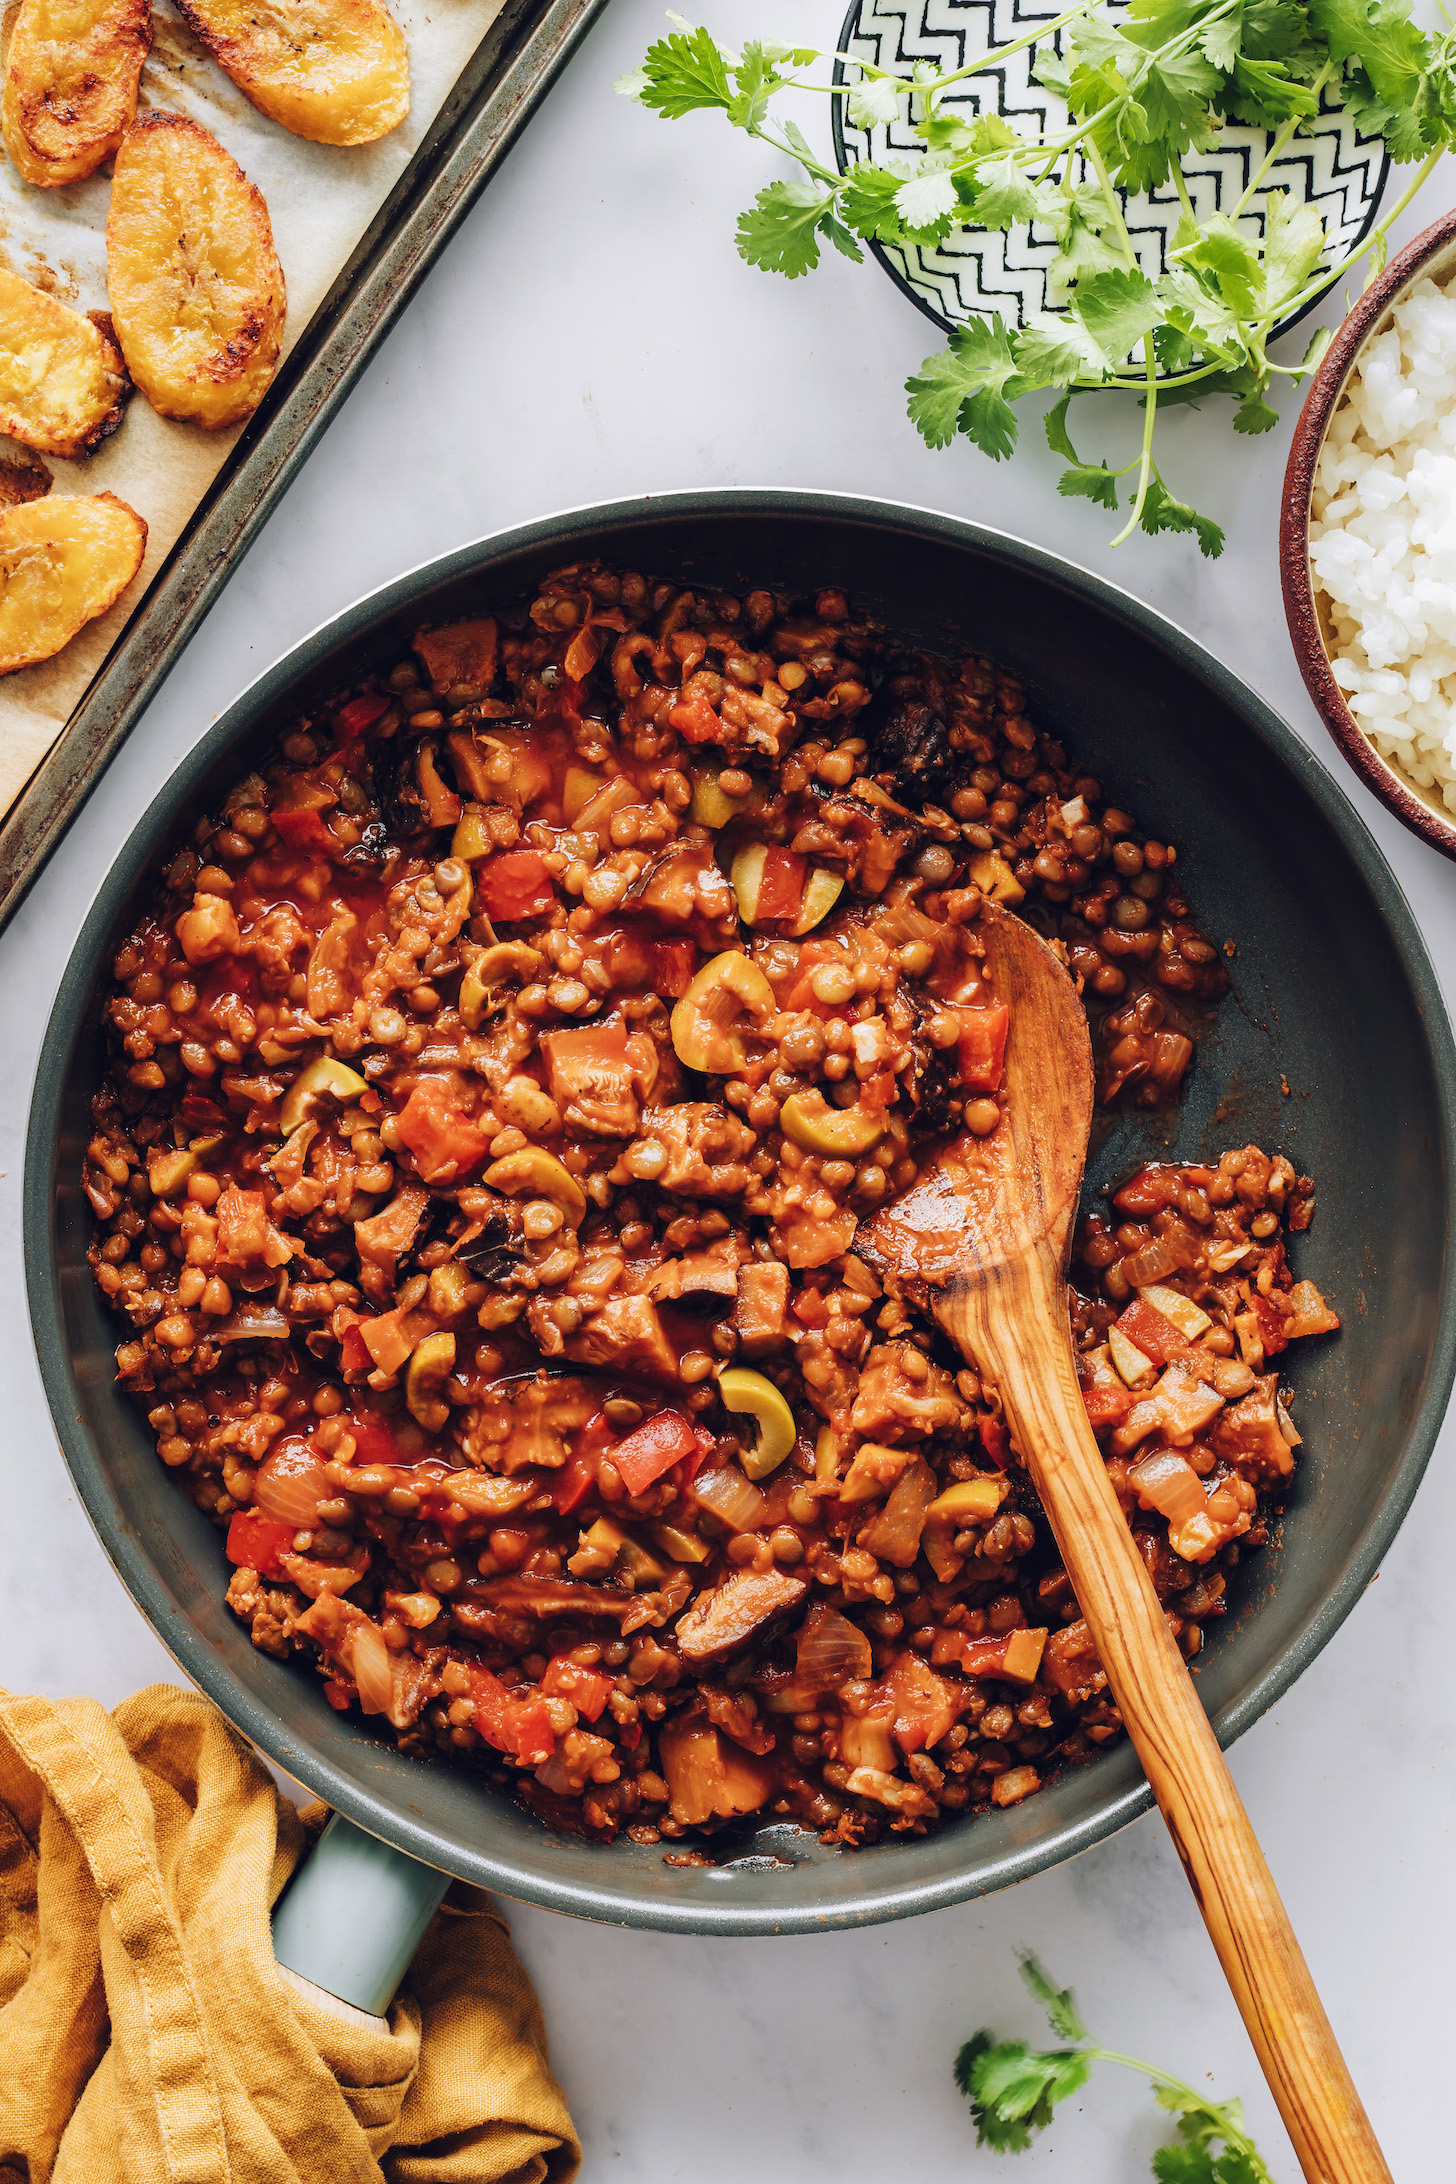 Wooden spoon in a skillet of lentil picadillo